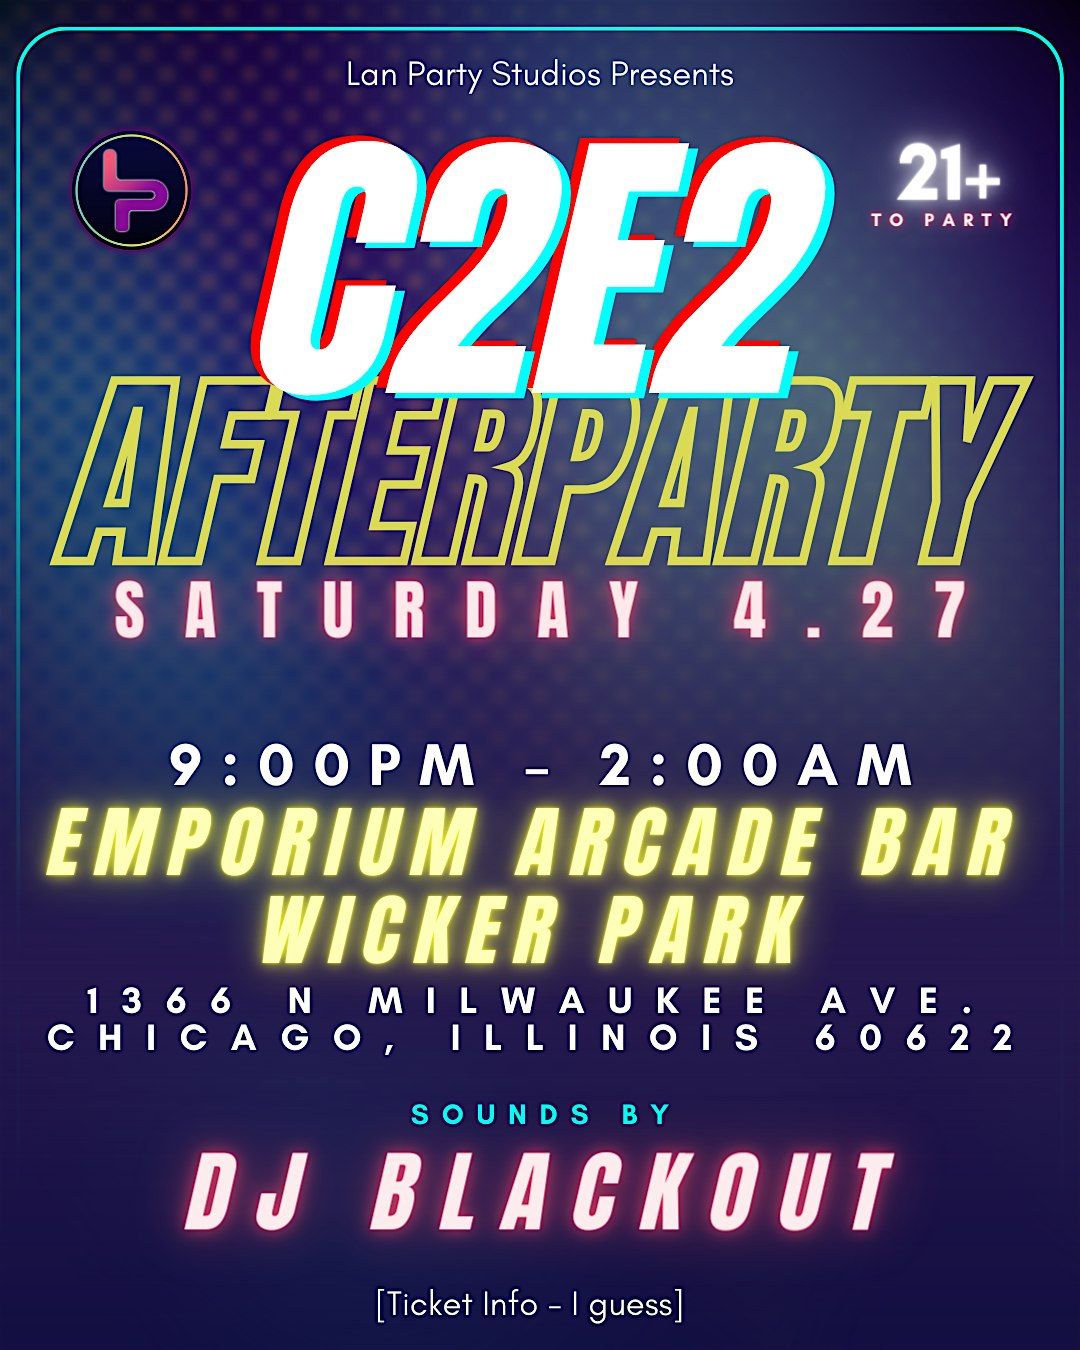 LAN Party Presents: C2E2 After Party